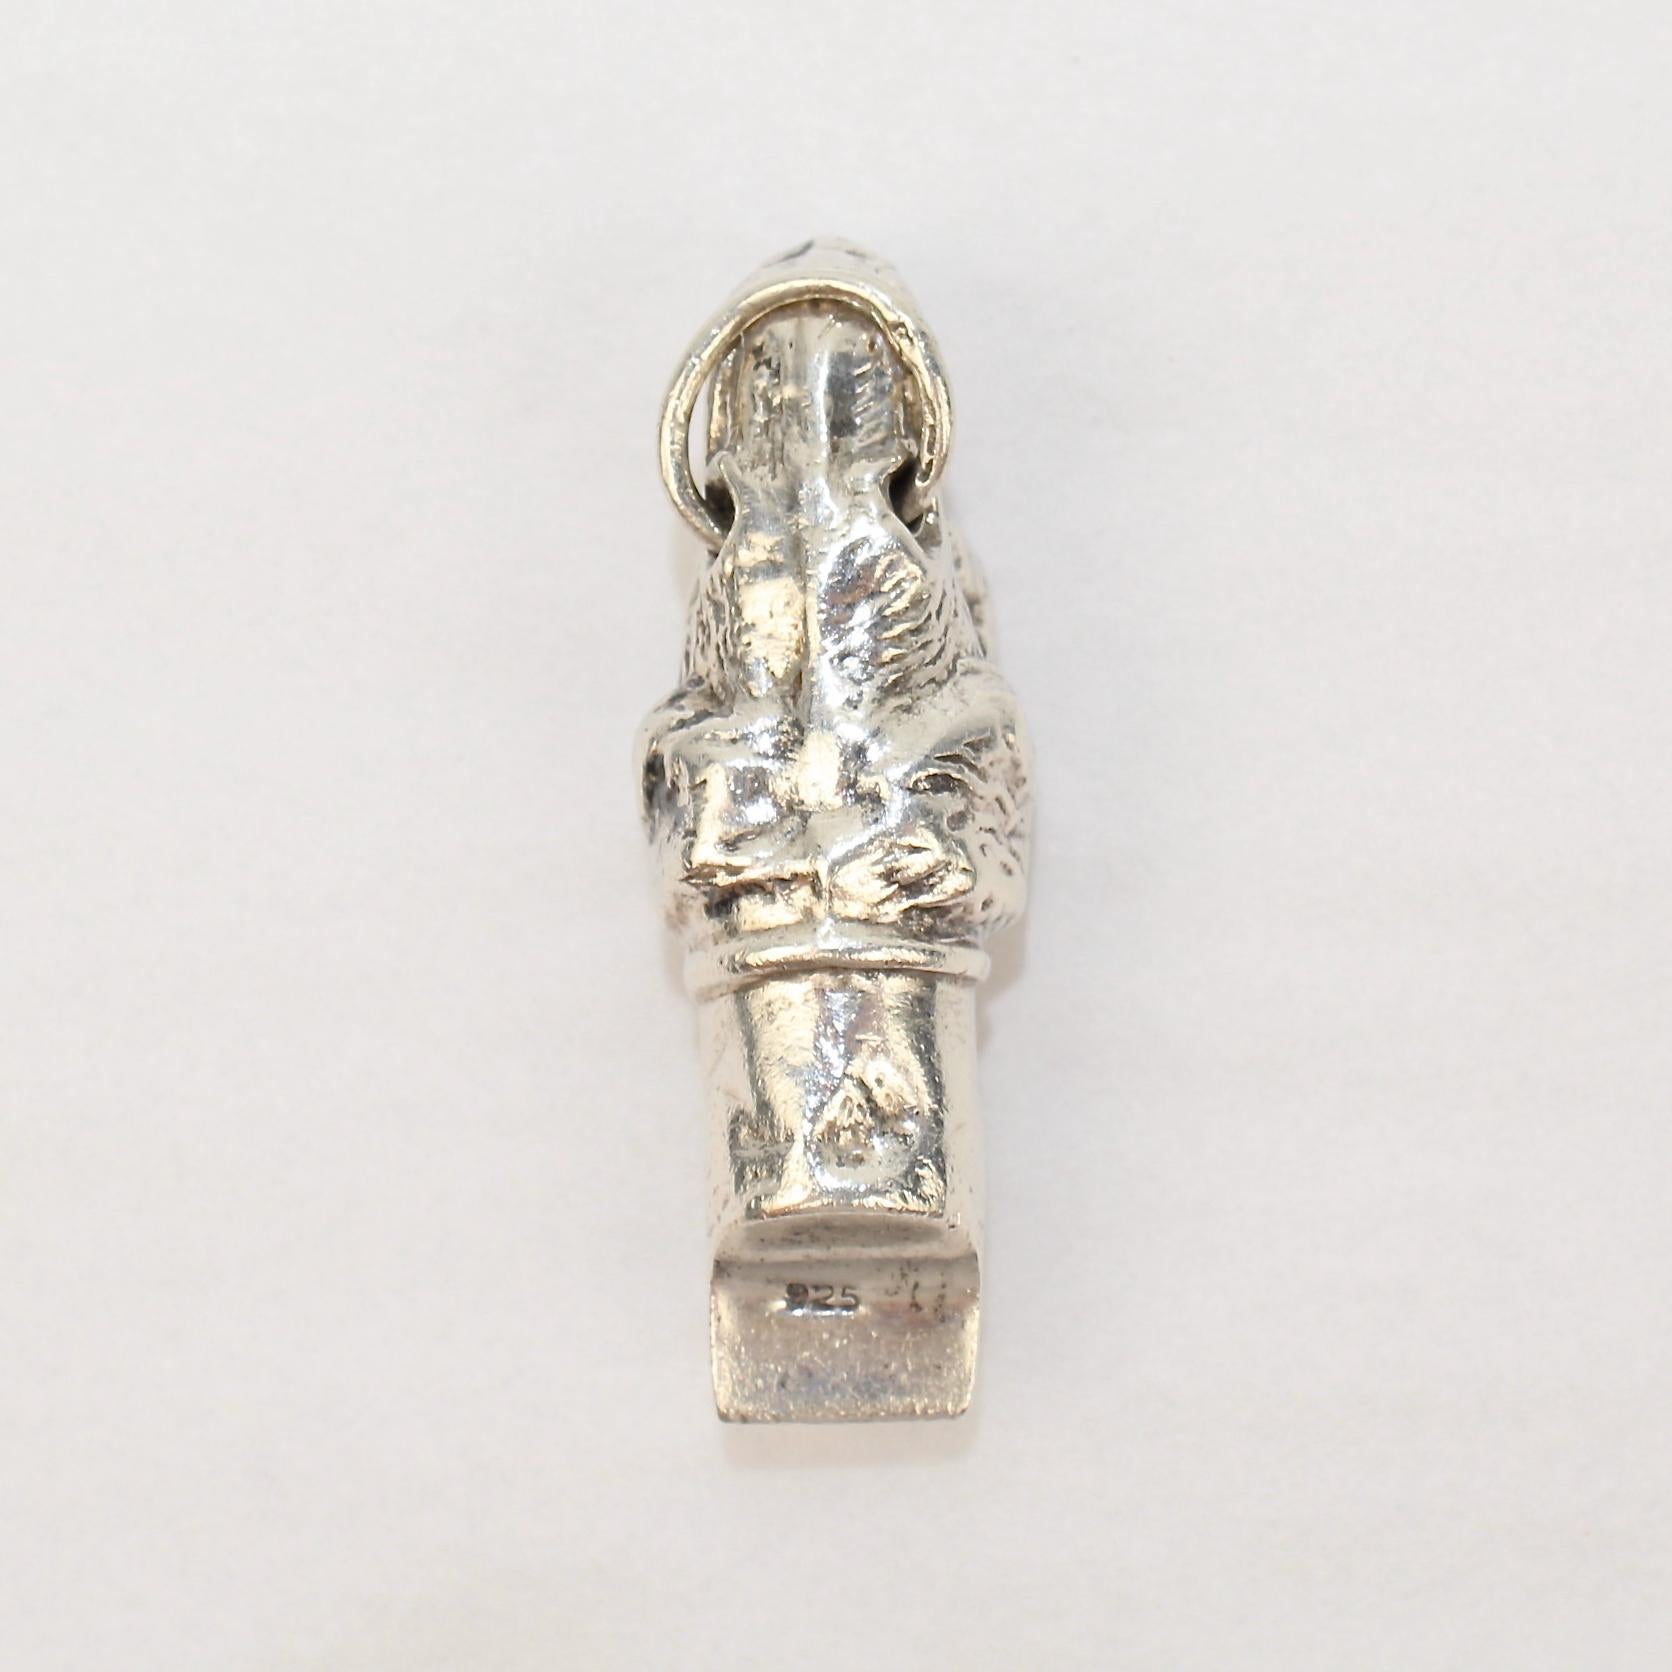 Women's or Men's Figural Sterling Silver Dog Whistle from the Mario Buatta Collection For Sale